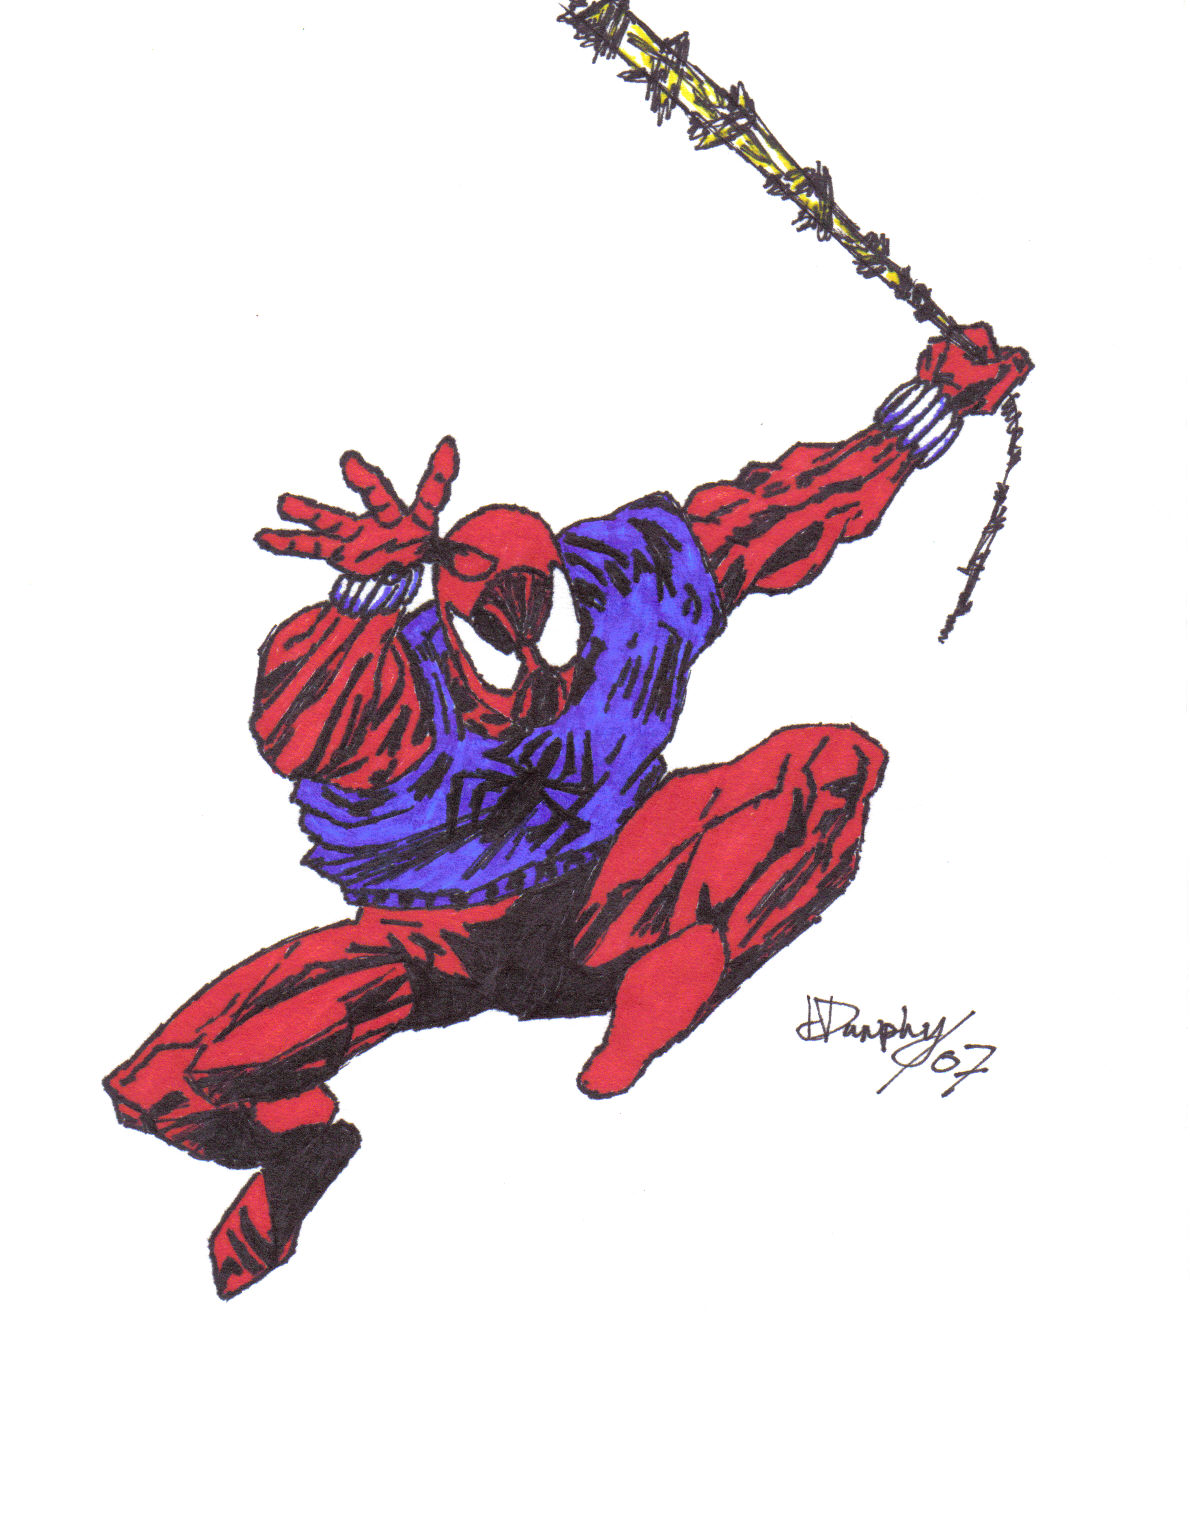 Scarlet-Spider by Dunphy